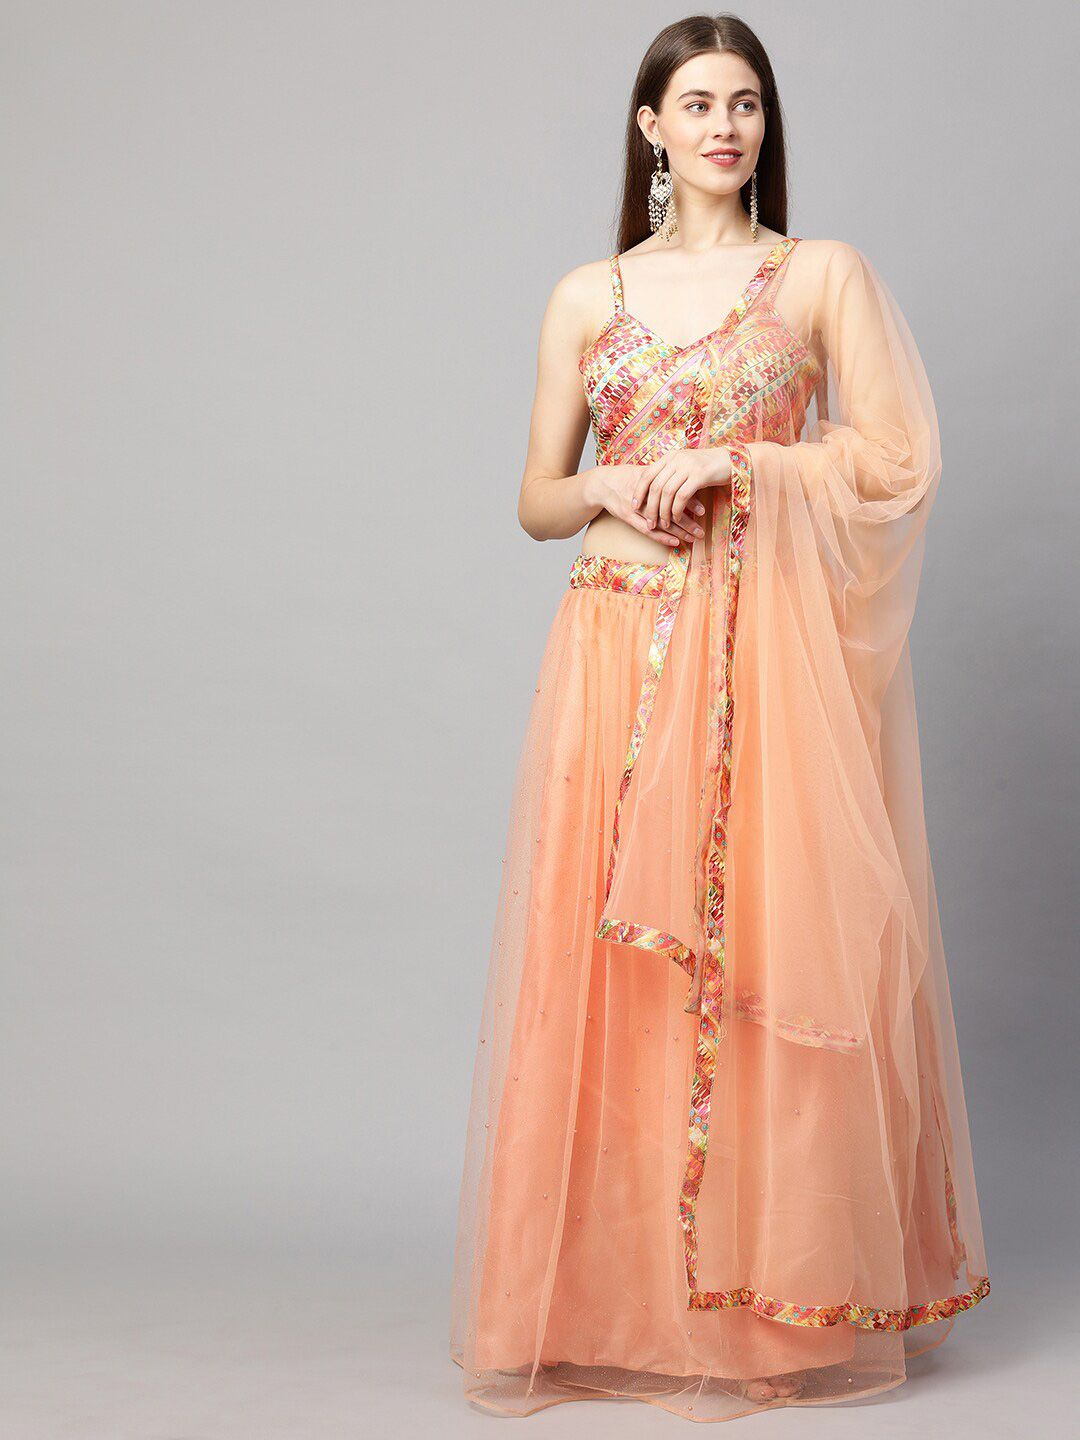 RedRound Peach-Coloured & Orange Embroidered Semi-Stitched Lehenga & Unstitched Blouse With Dupatta Price in India